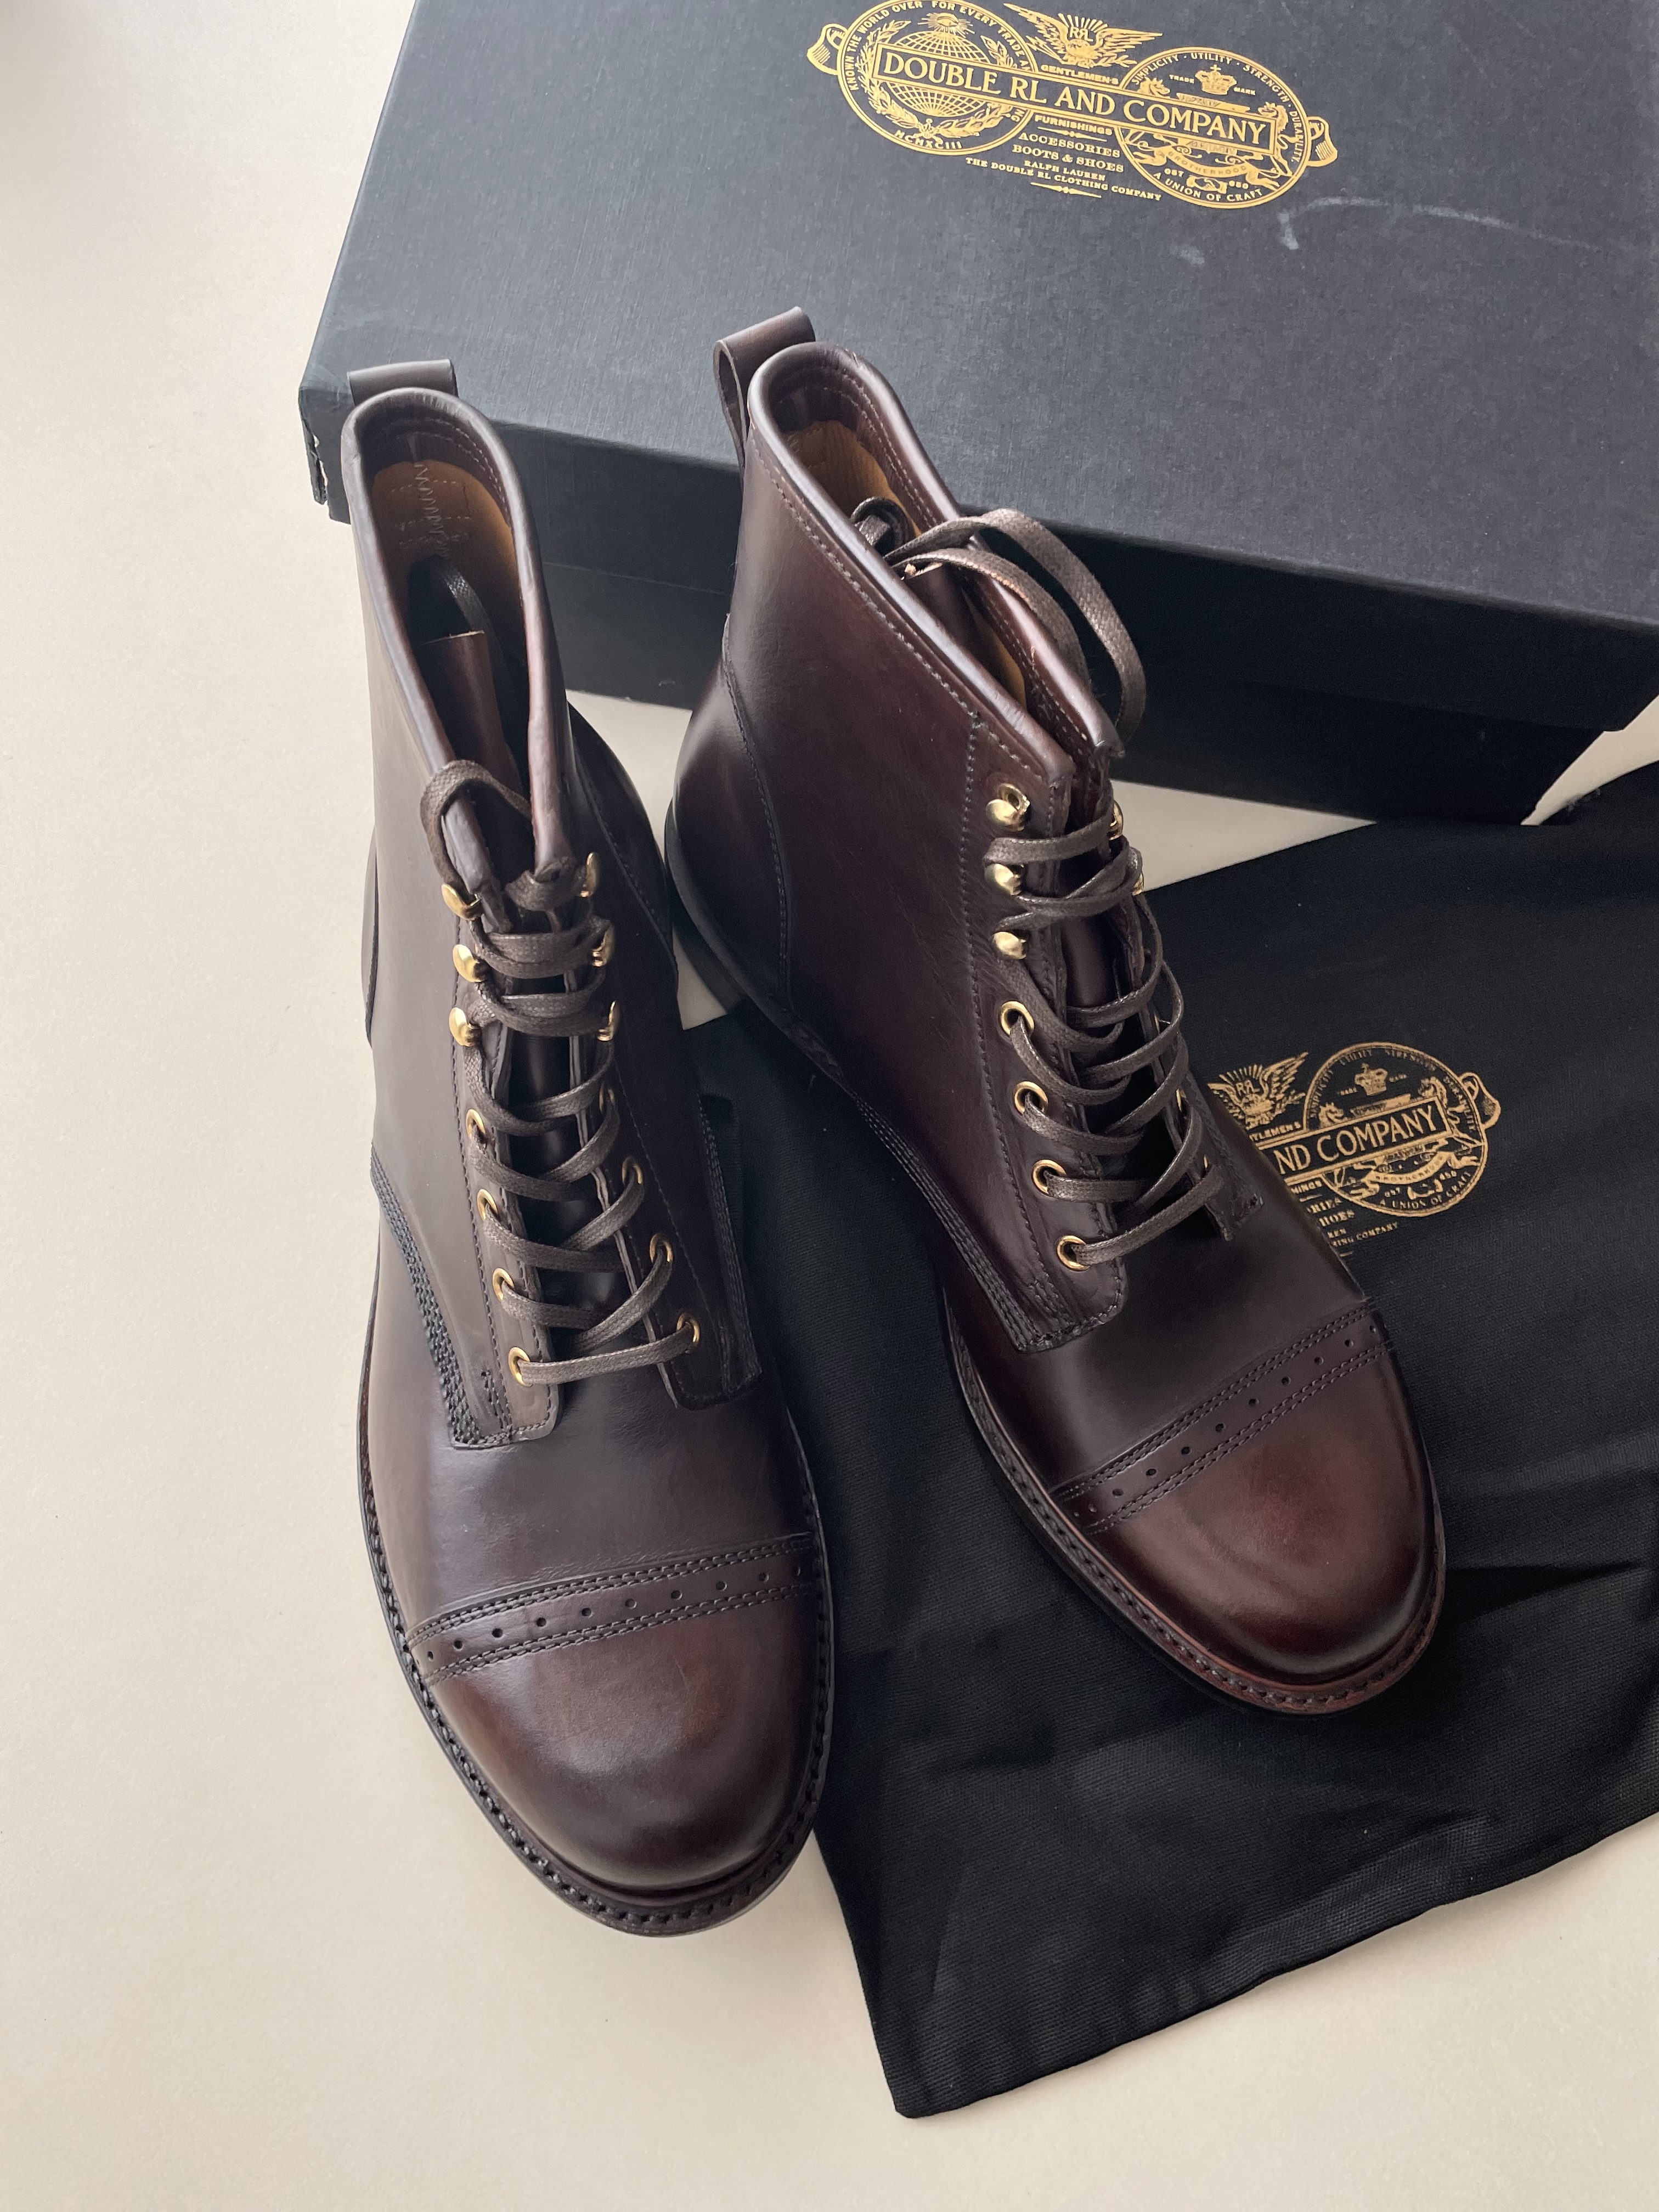 RRL Bowery boots size 12 US, NWT | The Fedora Lounge